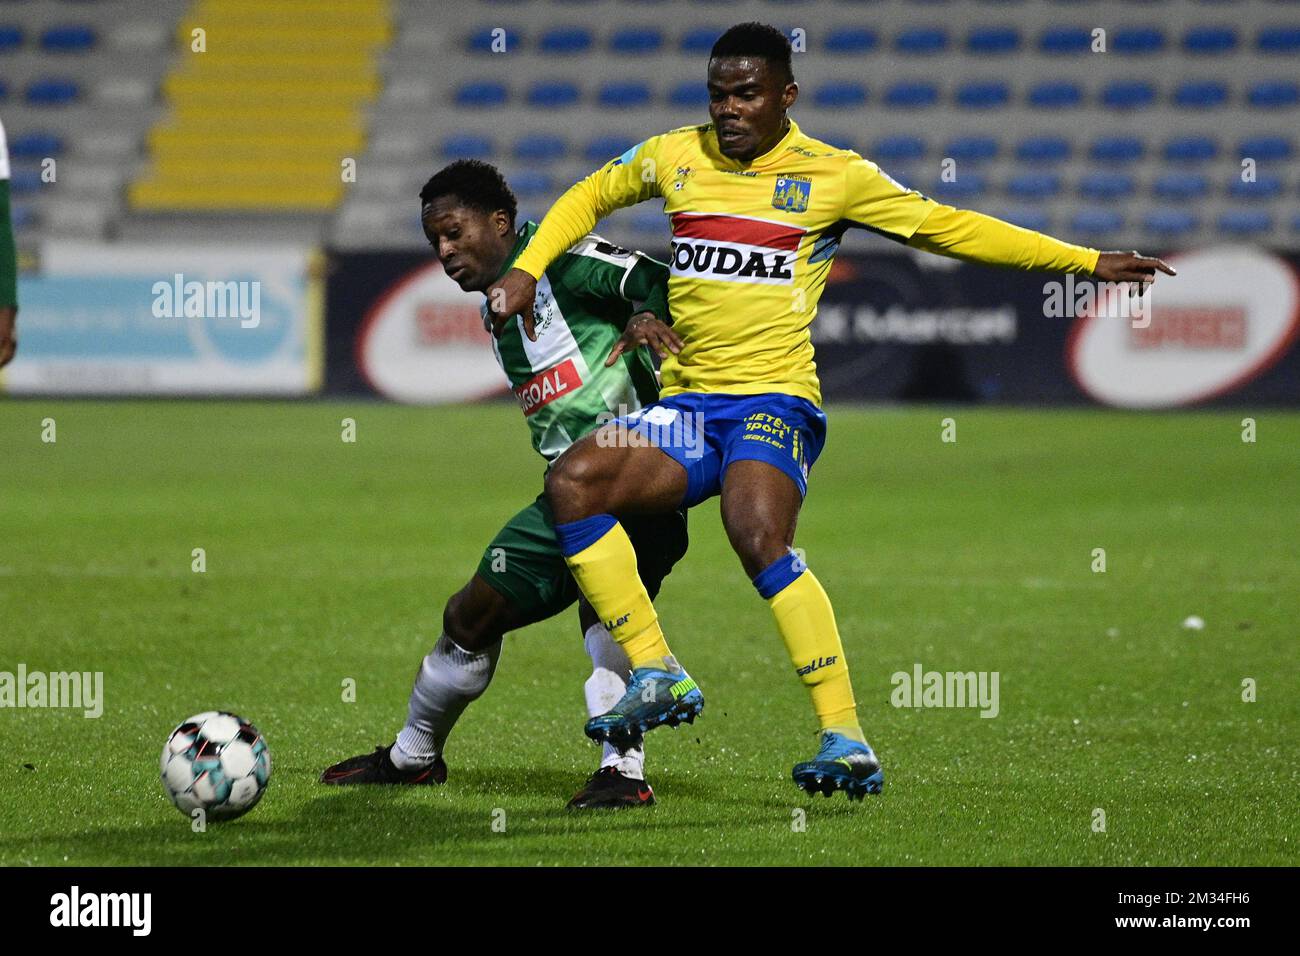 Lommel's Marlos Moreno and Westerlo's Kouya Mabea fight for the ball during a soccer match between KVC Westerlo and Lommel SK, Monday 15 February 2021 in Westerlo, on day 19 of the 'Proximus League' 1B second division of the Belgian soccer championship. BELGA PHOTO YORICK JANSENS Stock Photo